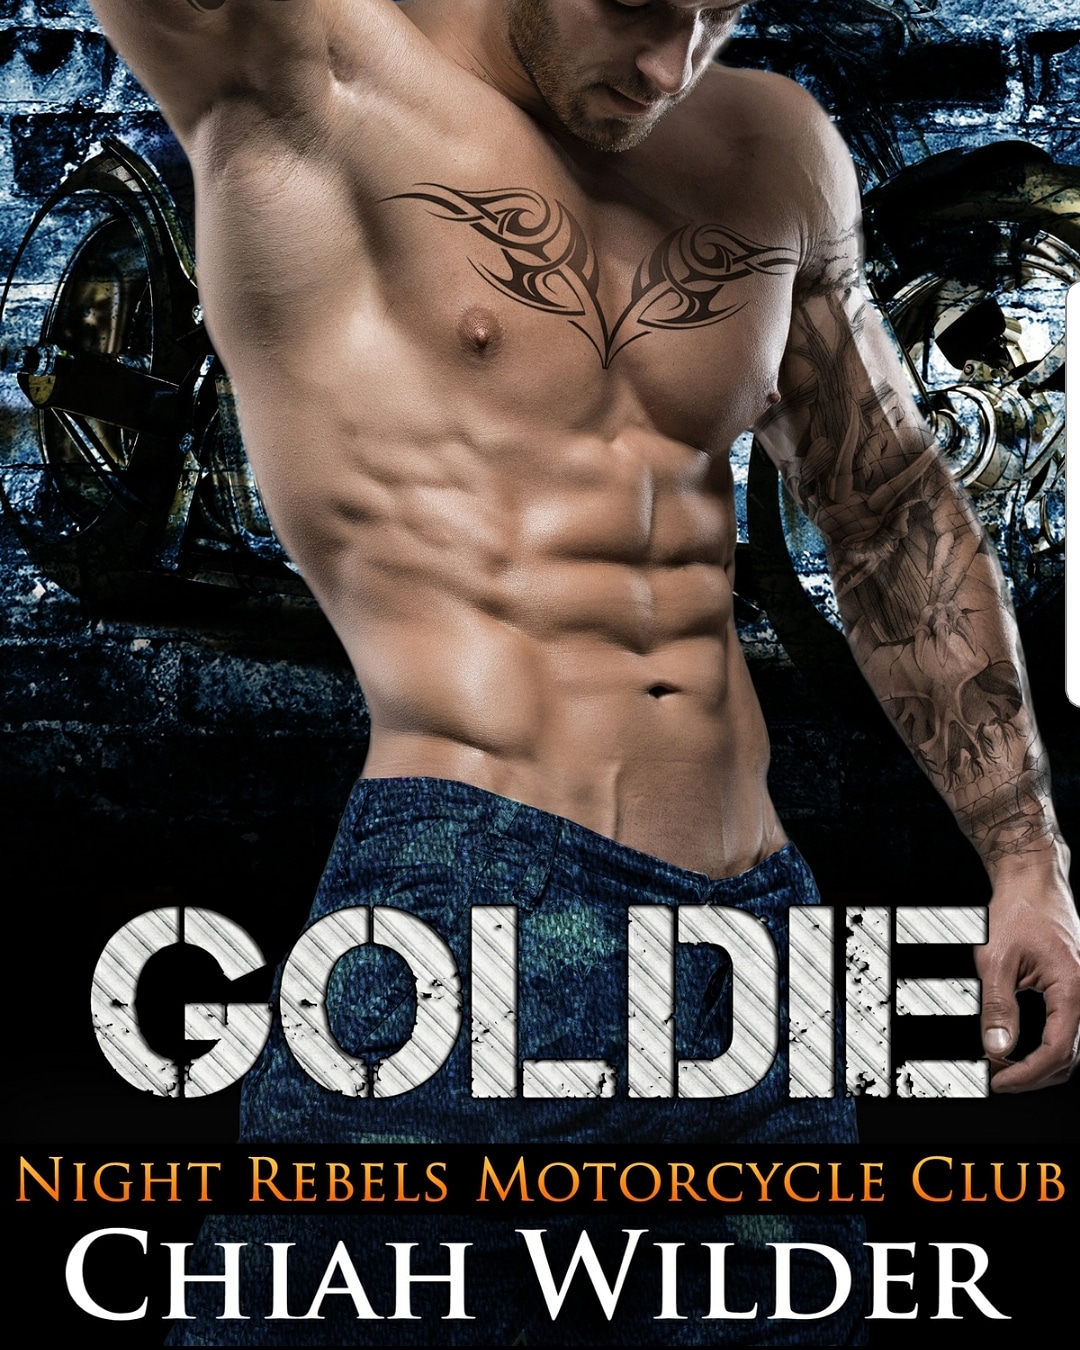 Goldie Book Review